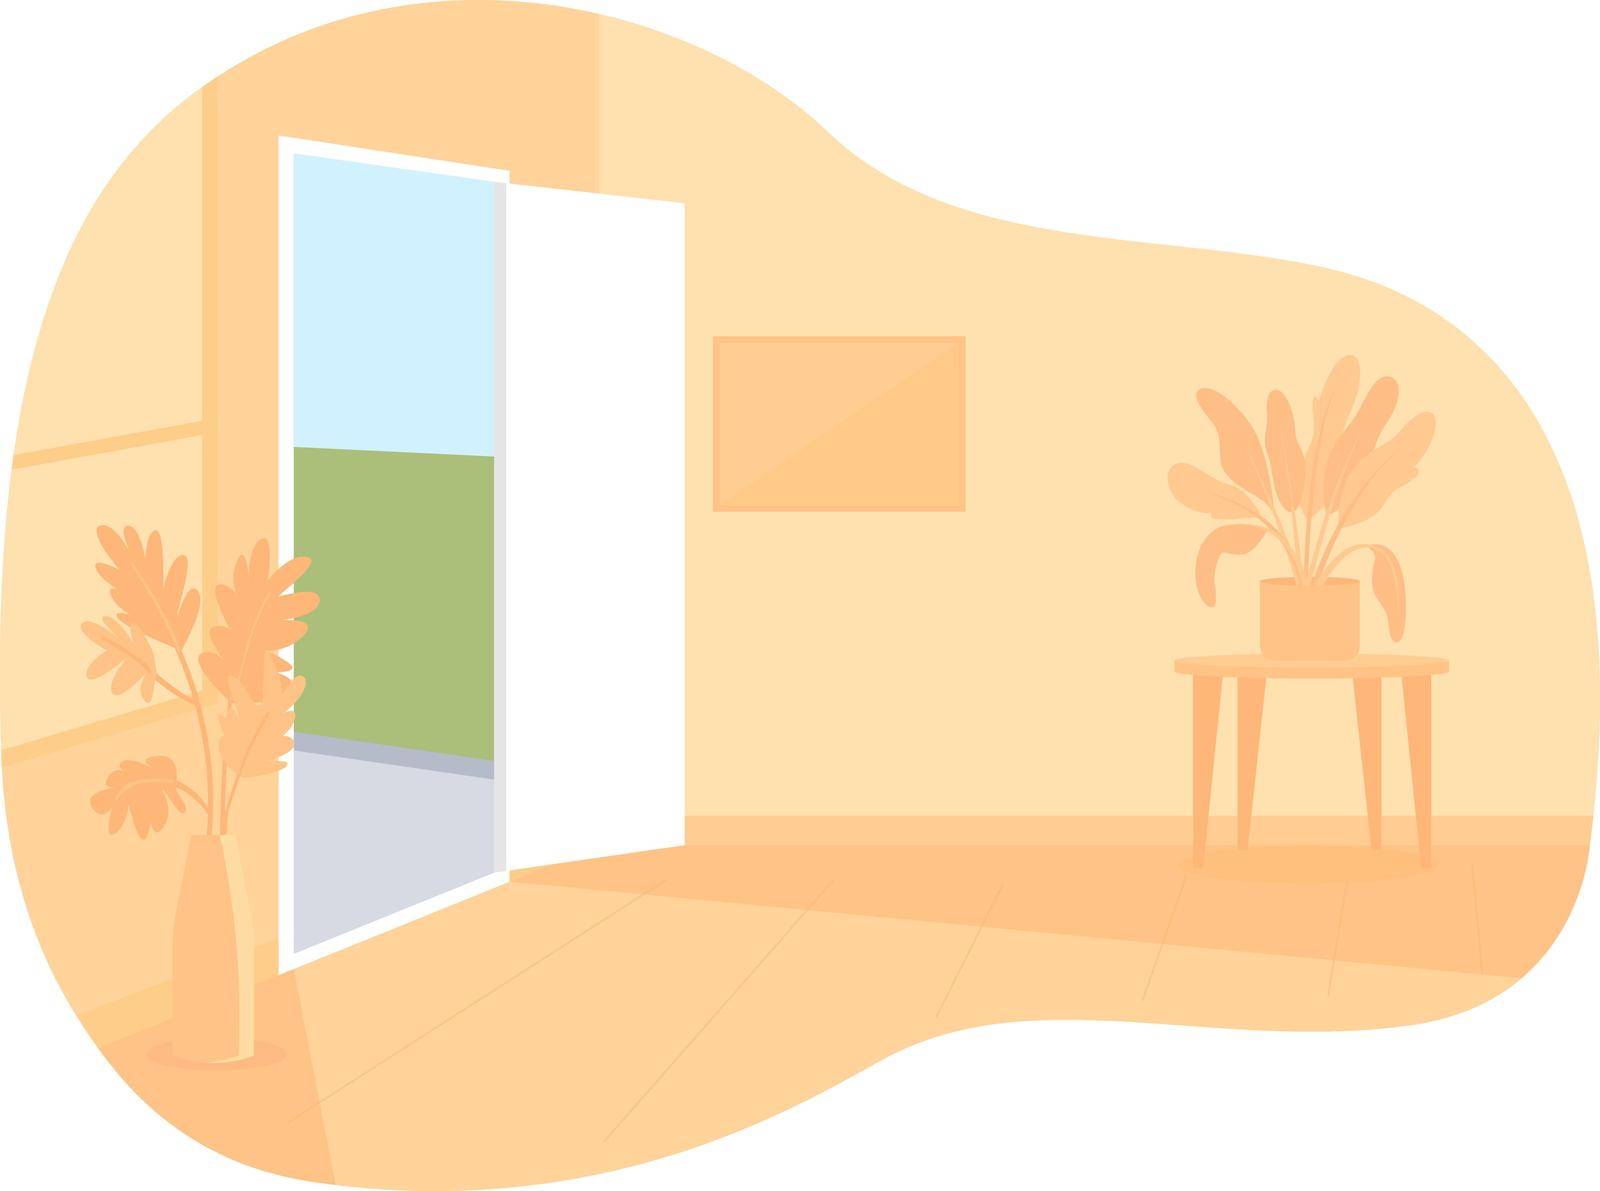 Empty room 2D vector isolated illustration. No people at apartment flat characters on cartoon background. Living room decoration interior. Nobody at comfortable accomodation colourful scene